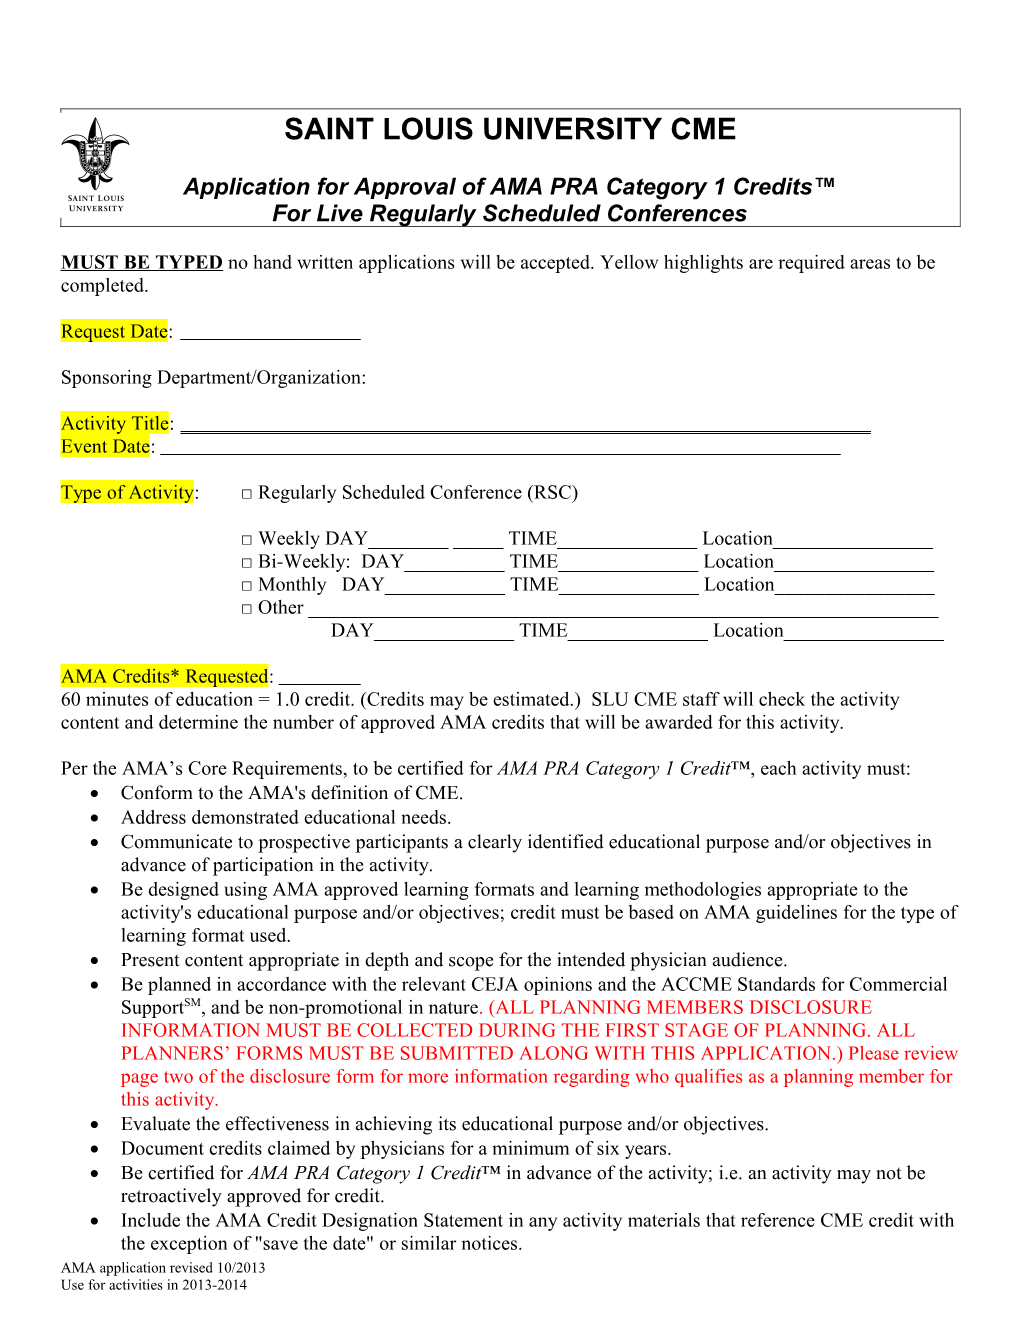 General Information Regarding Approval of Cme Activities for Ama Credits s1